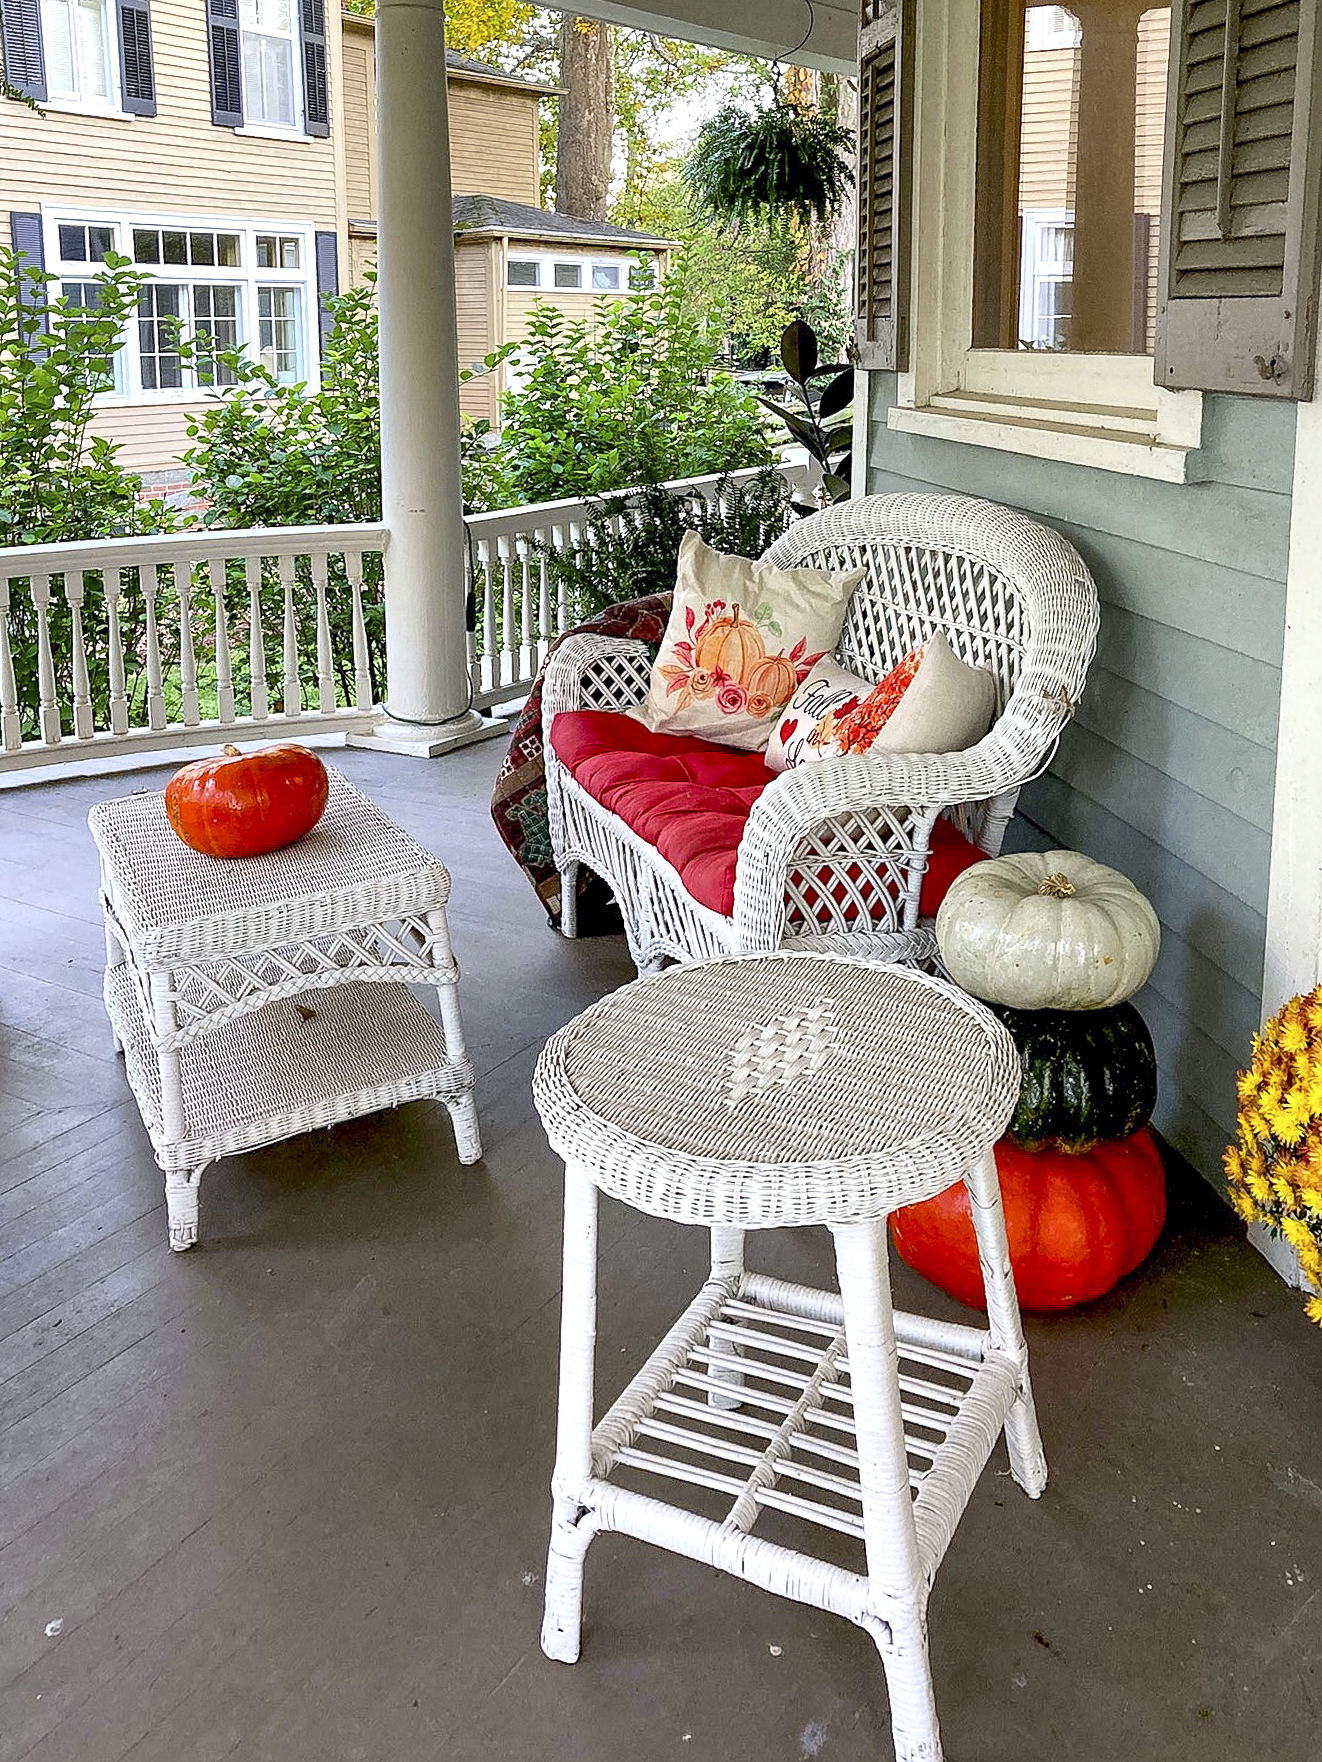 wicker seating on wrap around porch invite guests to relax